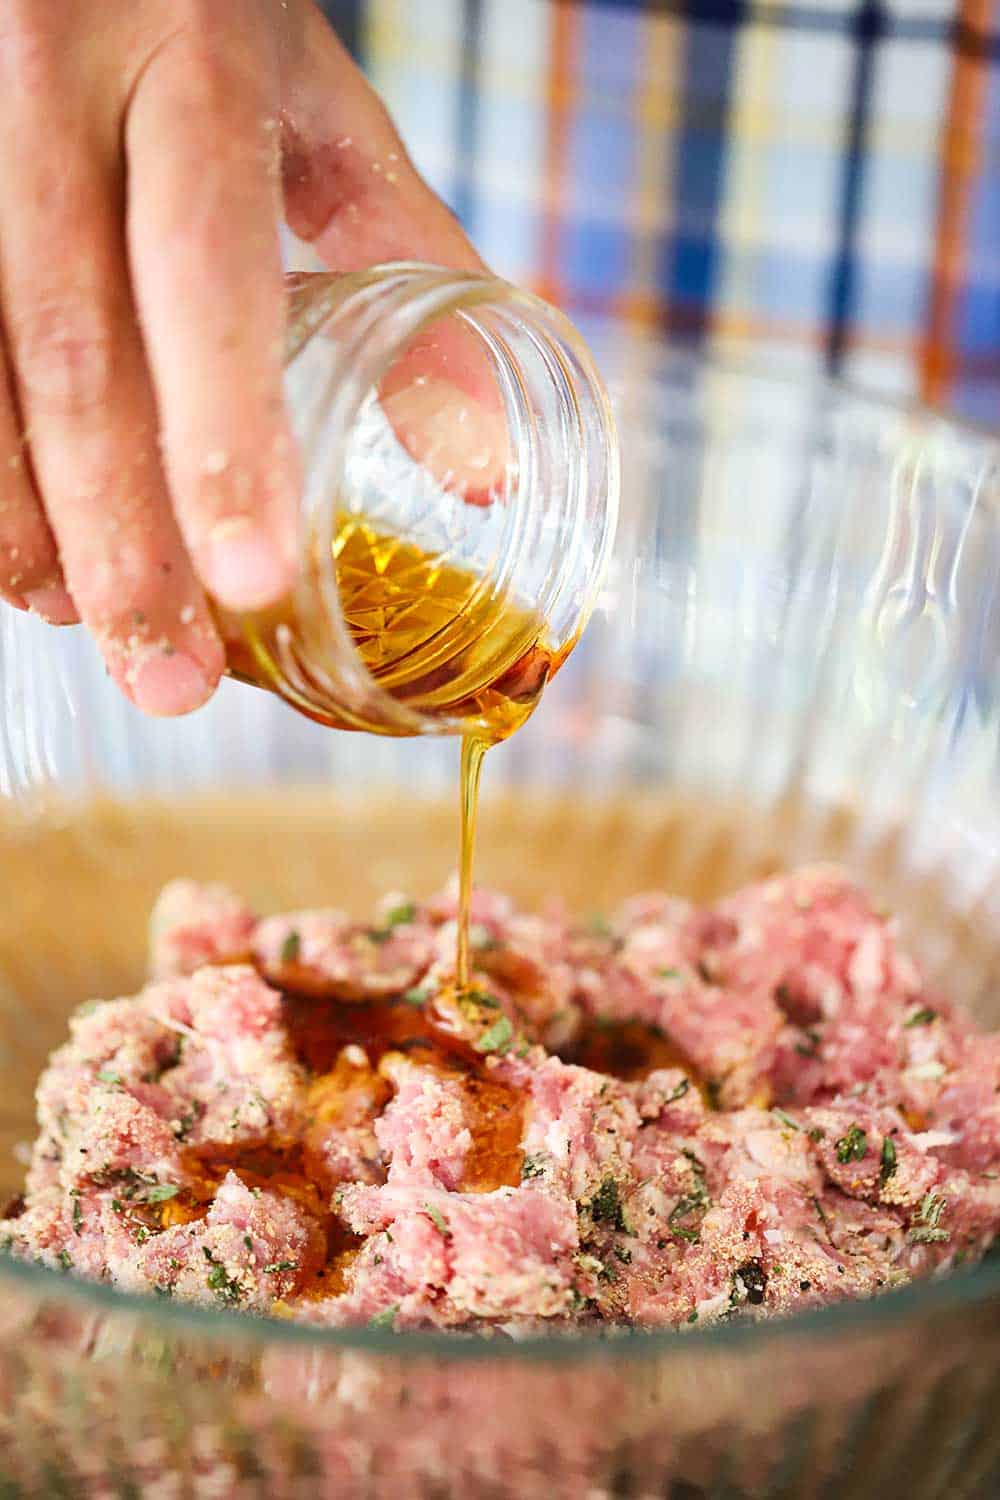 A hand pouring maple syrup from a small jar into a bowl of seasoned ground pork. 